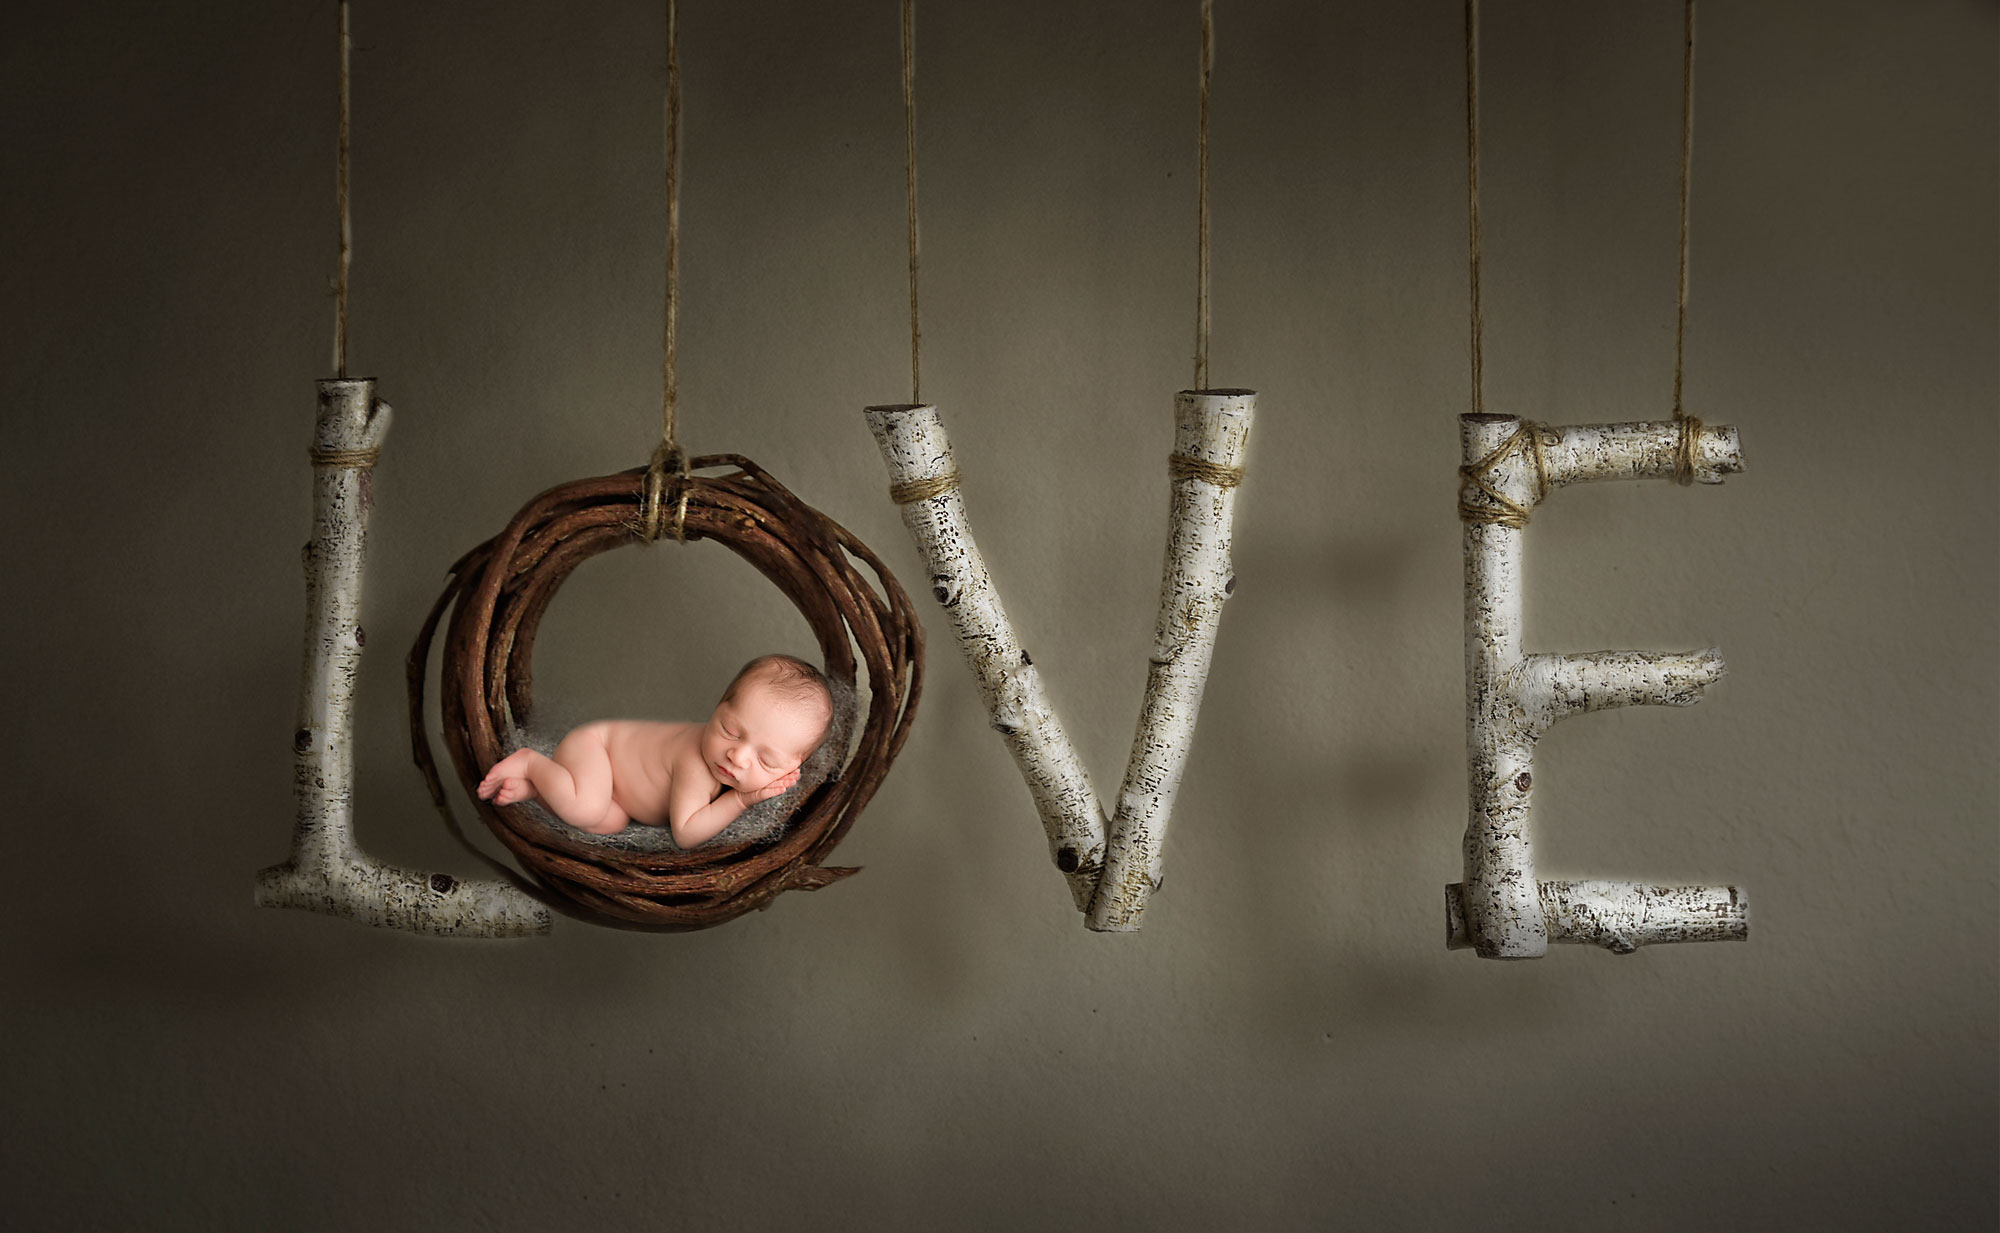 creative baby photography, naked baby asleep in wooden wreath "O" in suspended LOVE sign